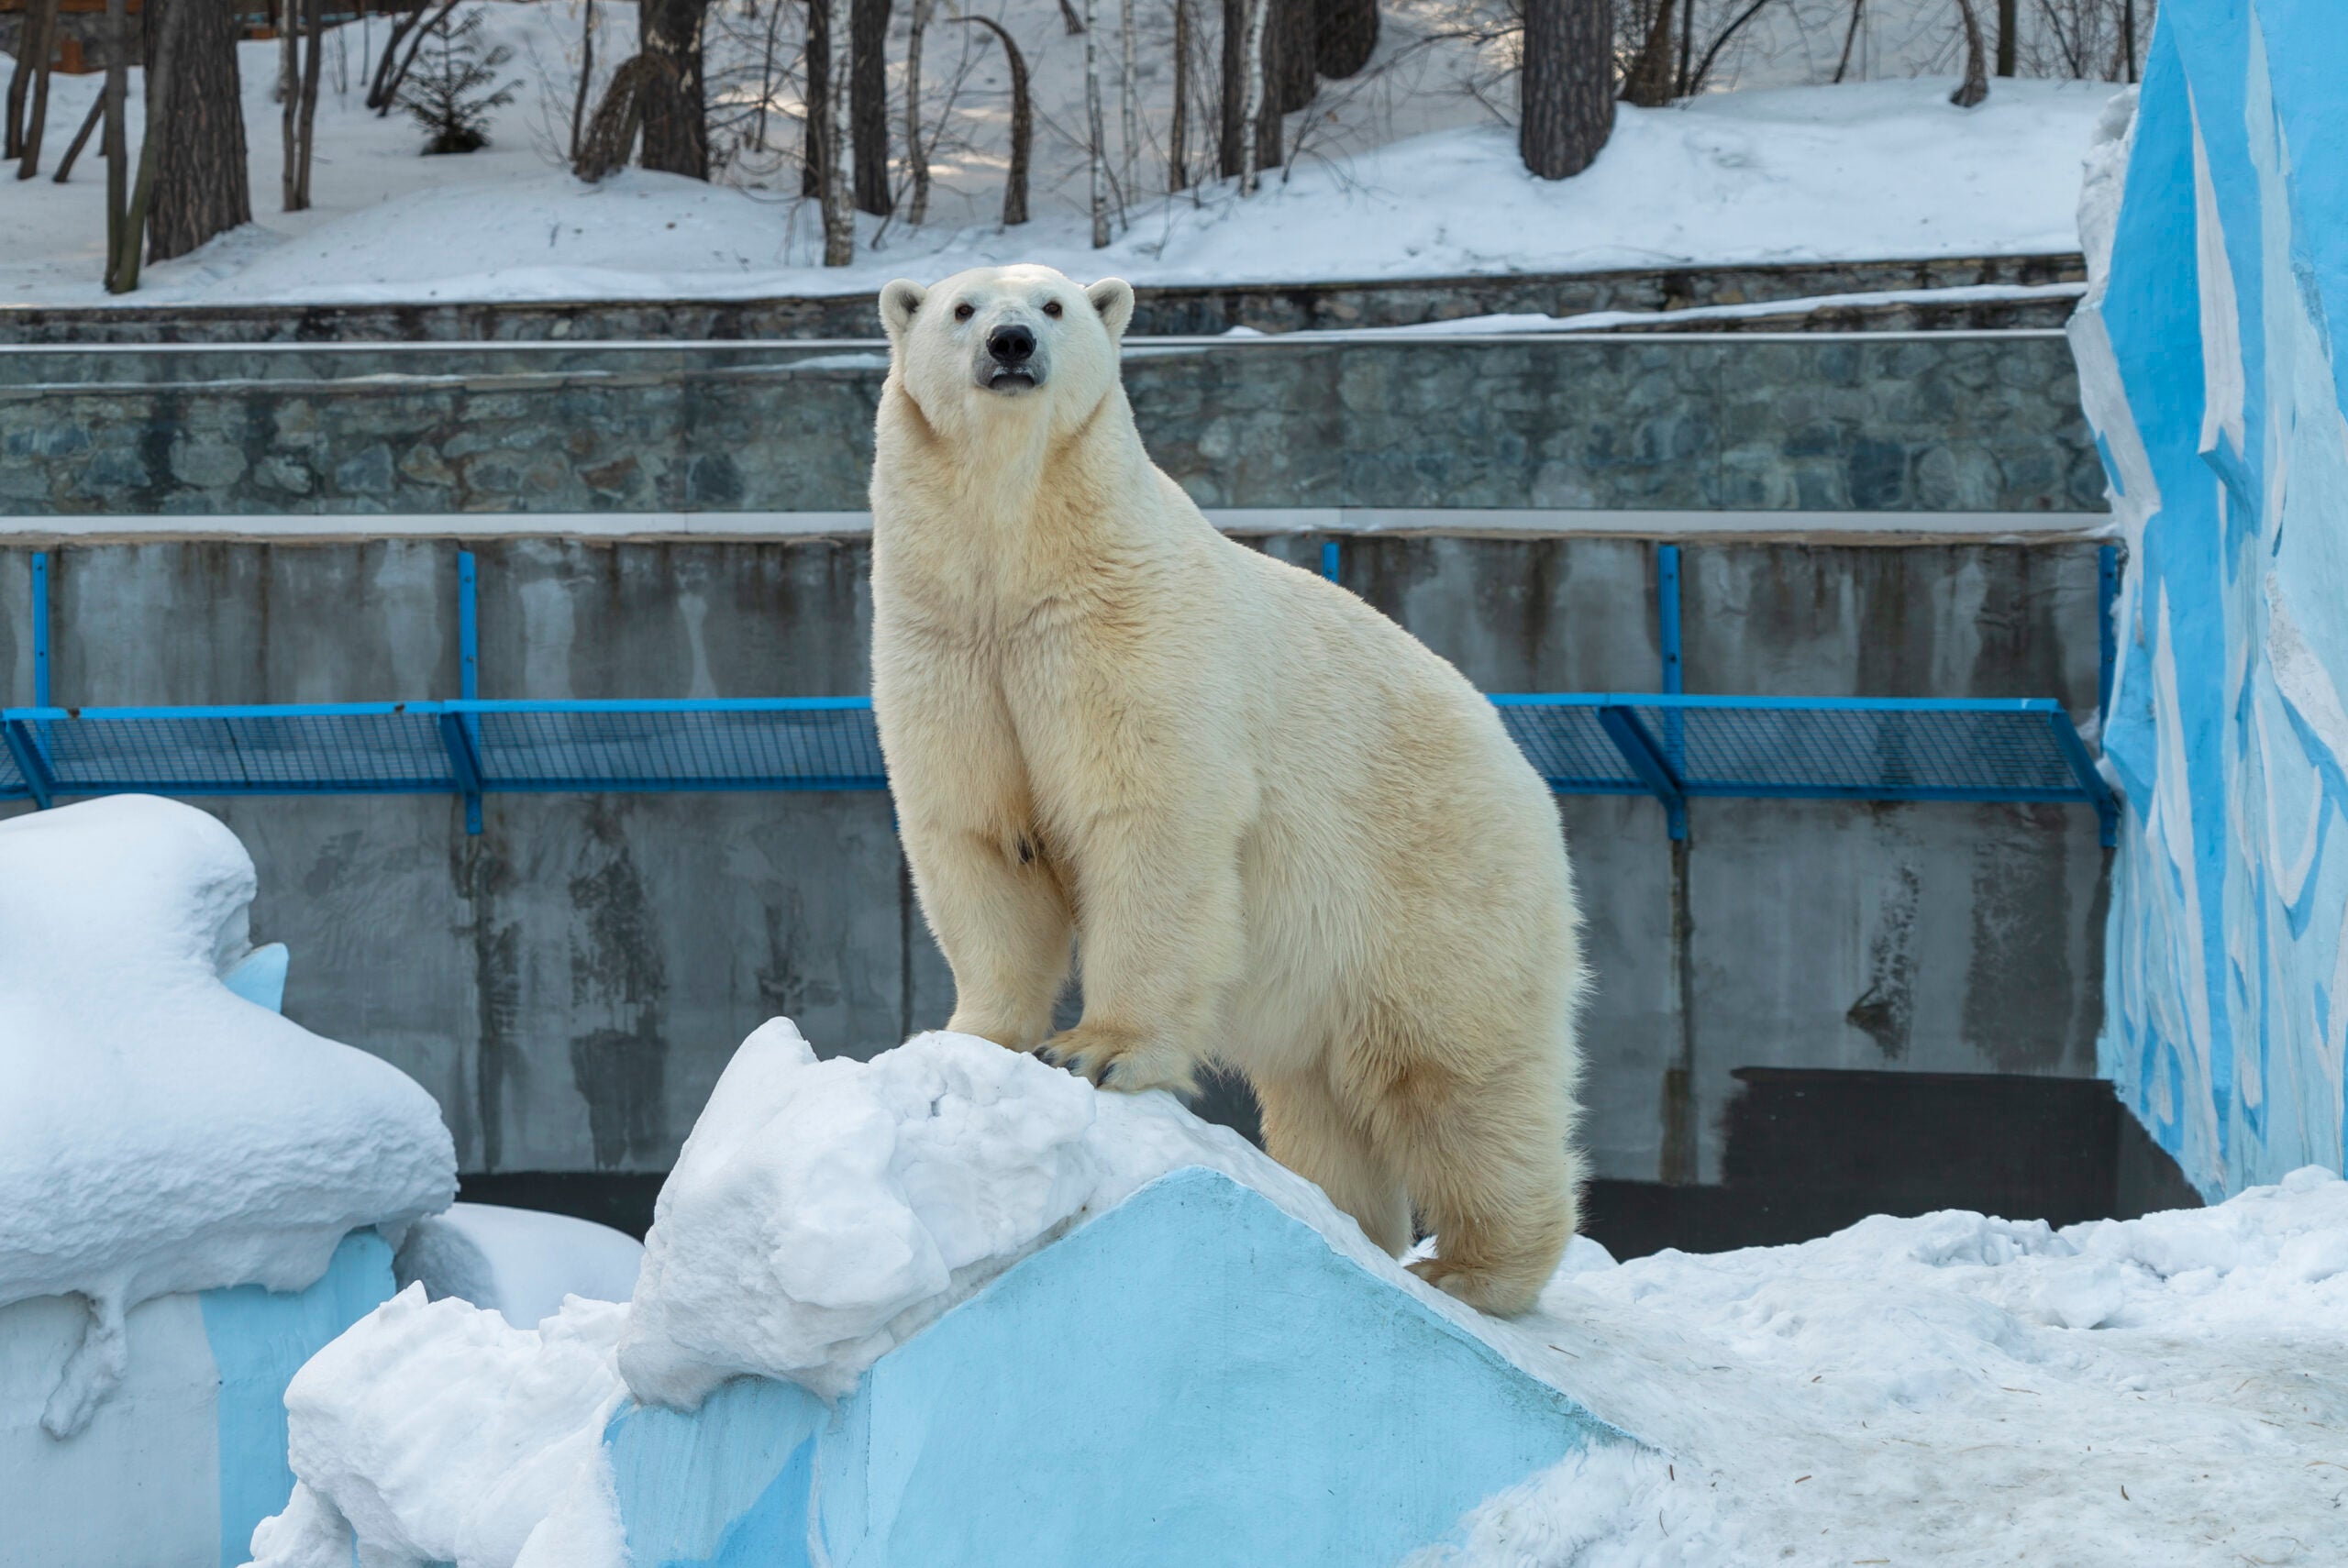 Studying polar bears in zoos aids conservation | Popular Science